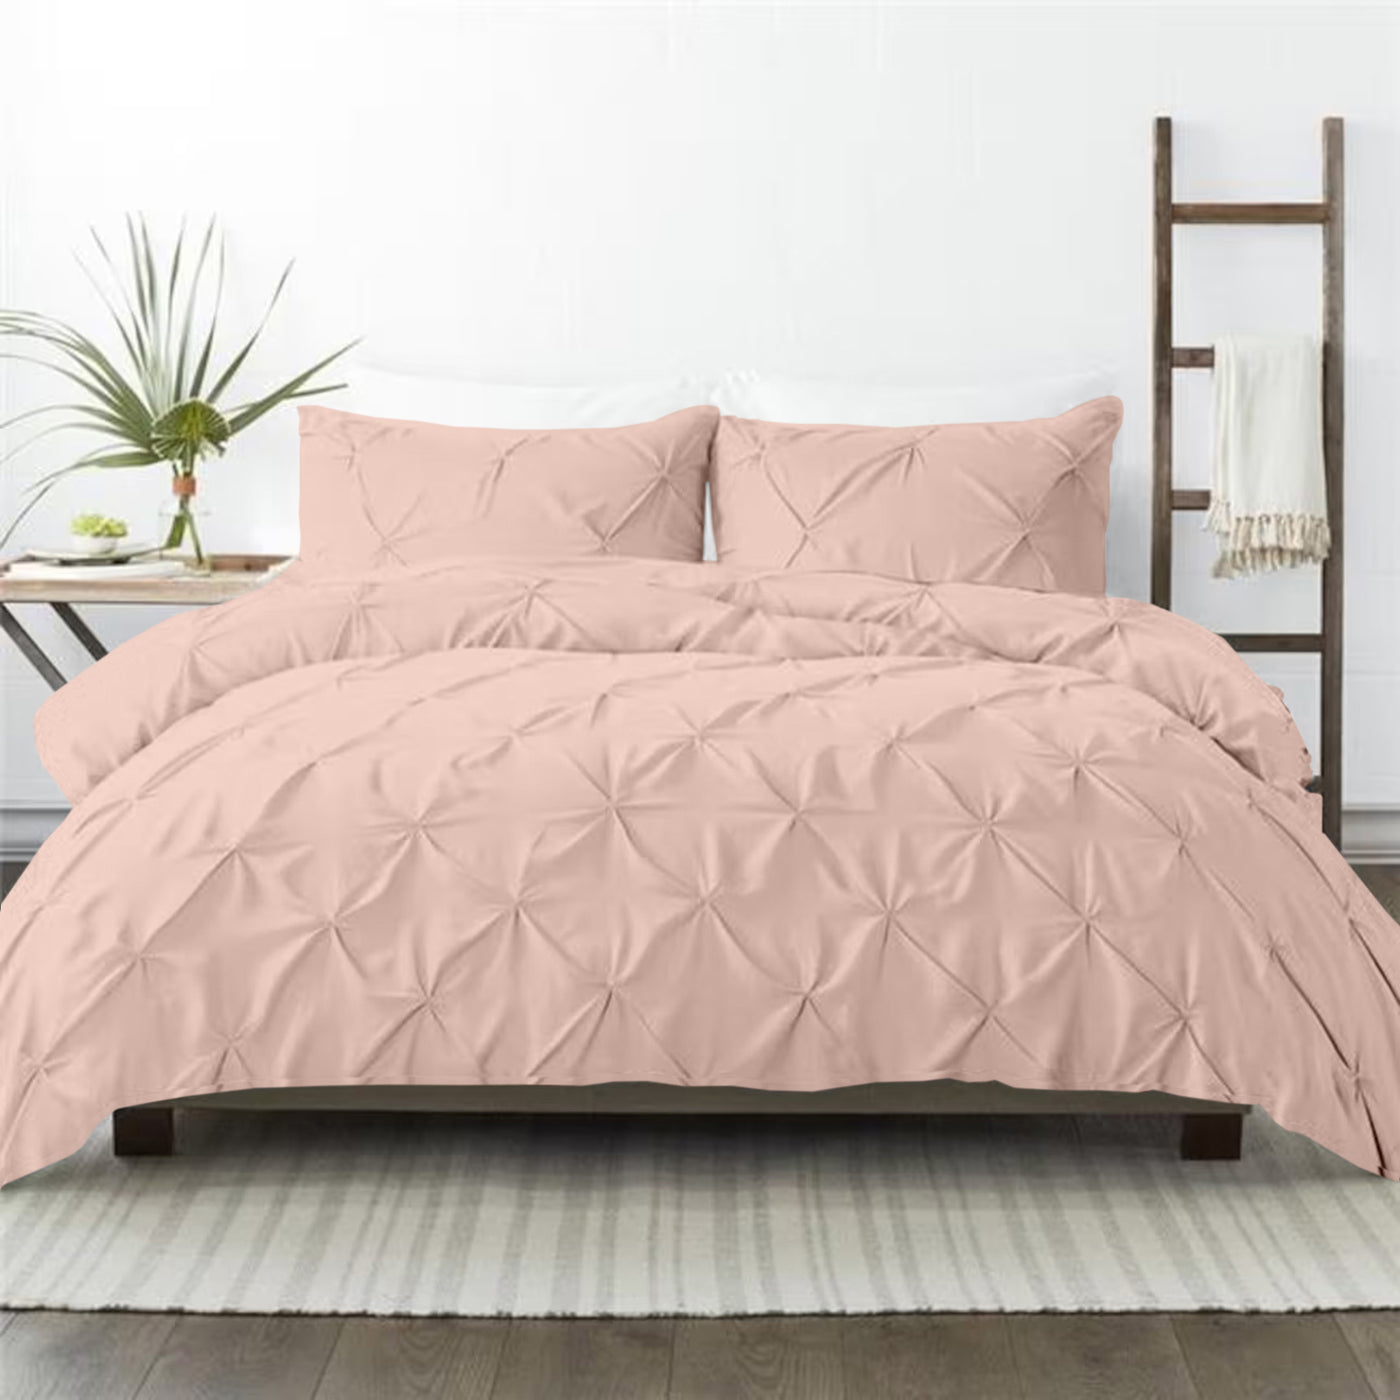 Buy Pinch Pleated 3 Piece Duvet Cover Set Online at Kotton Culture